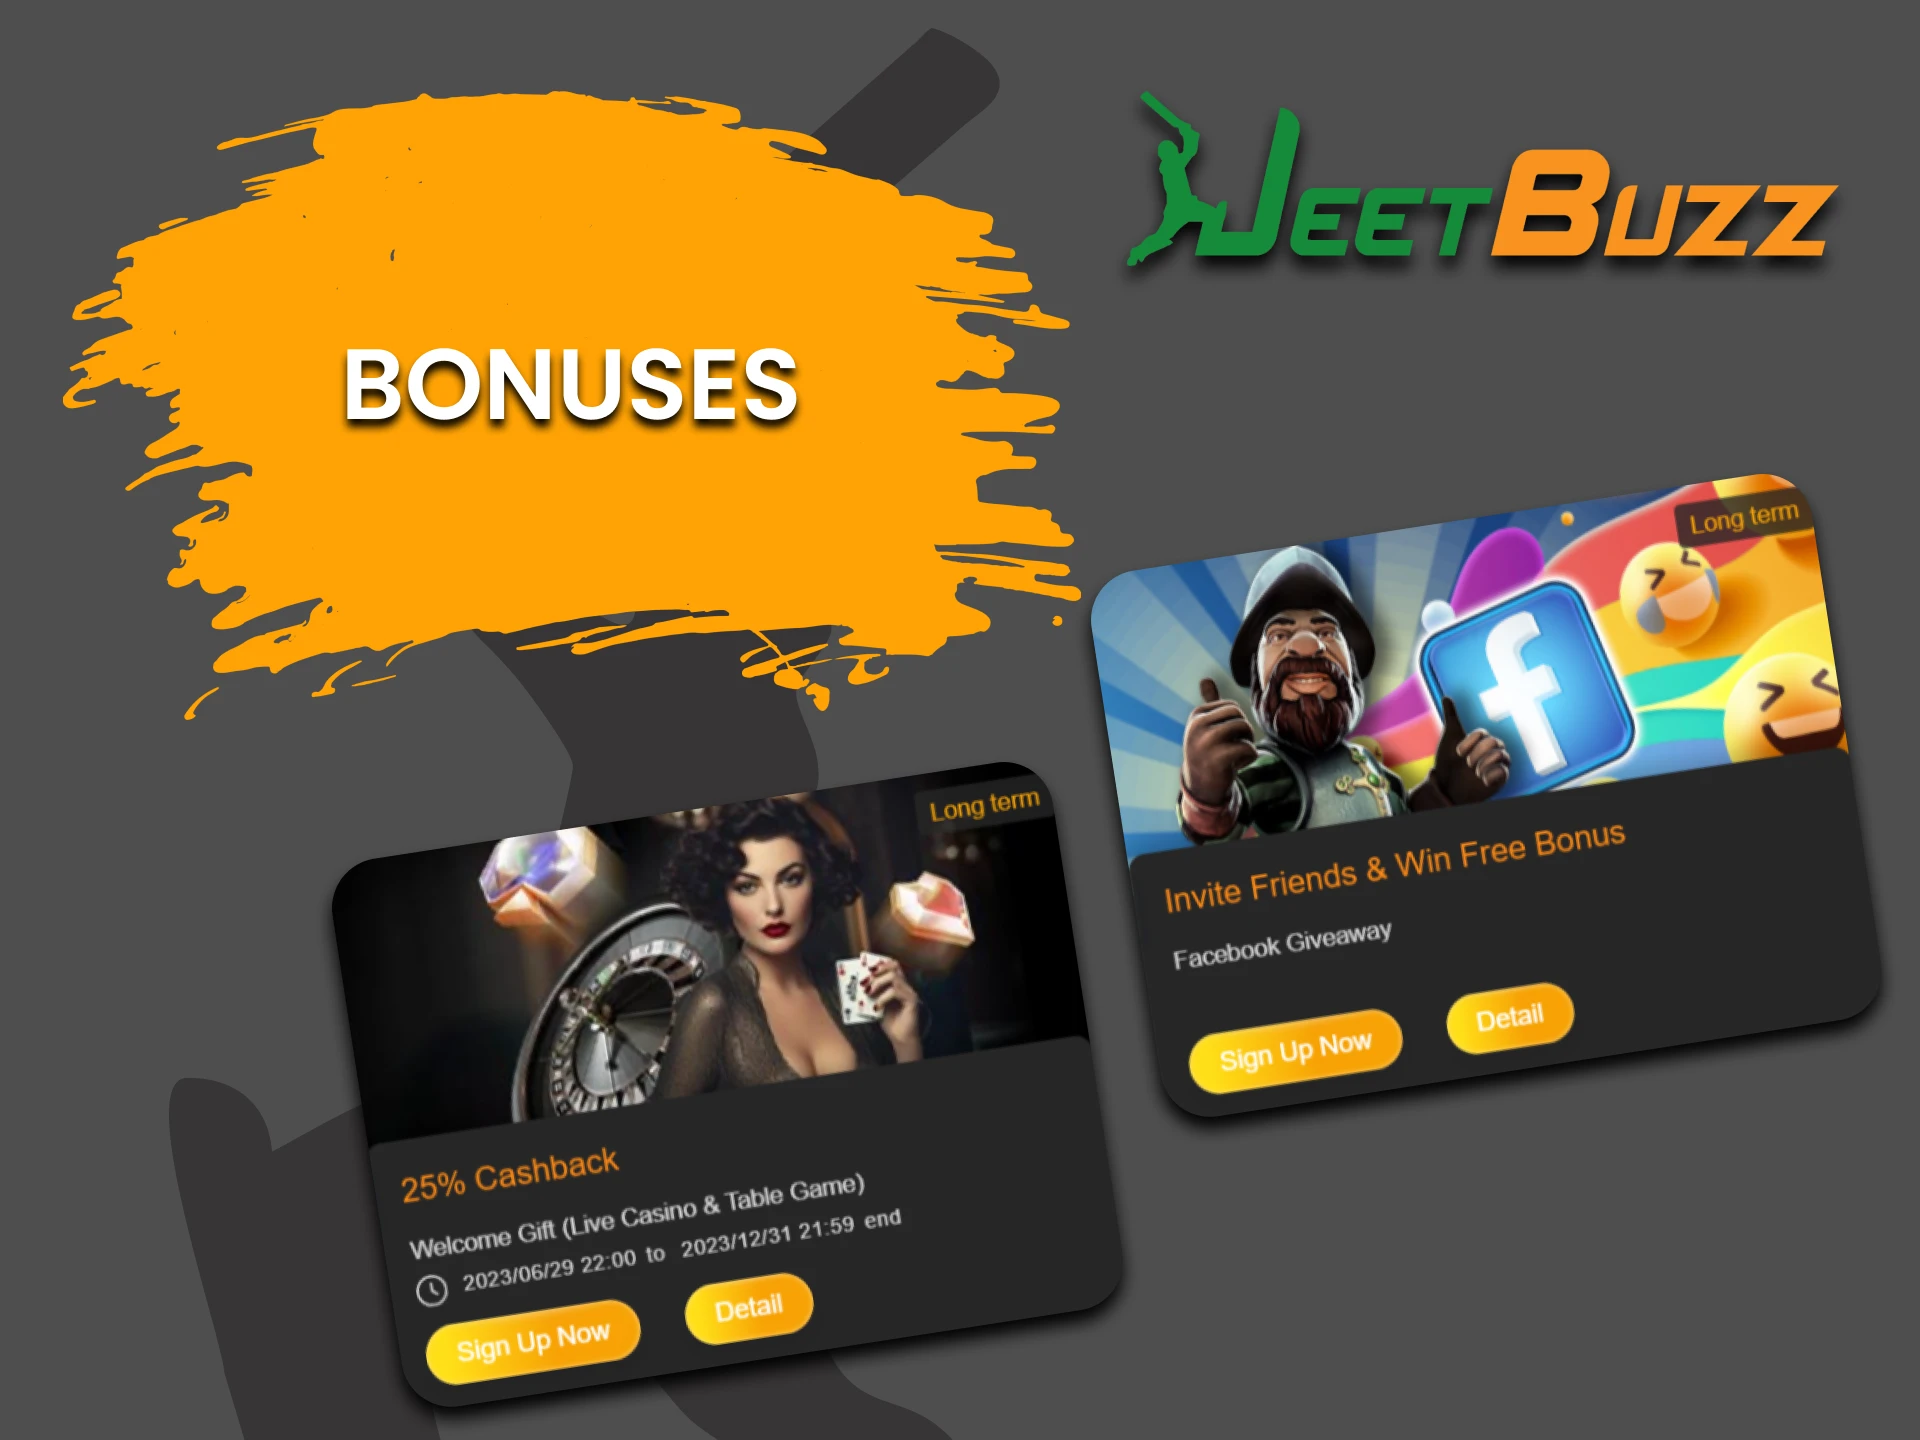 JeetBuzz gives bonuses to players.